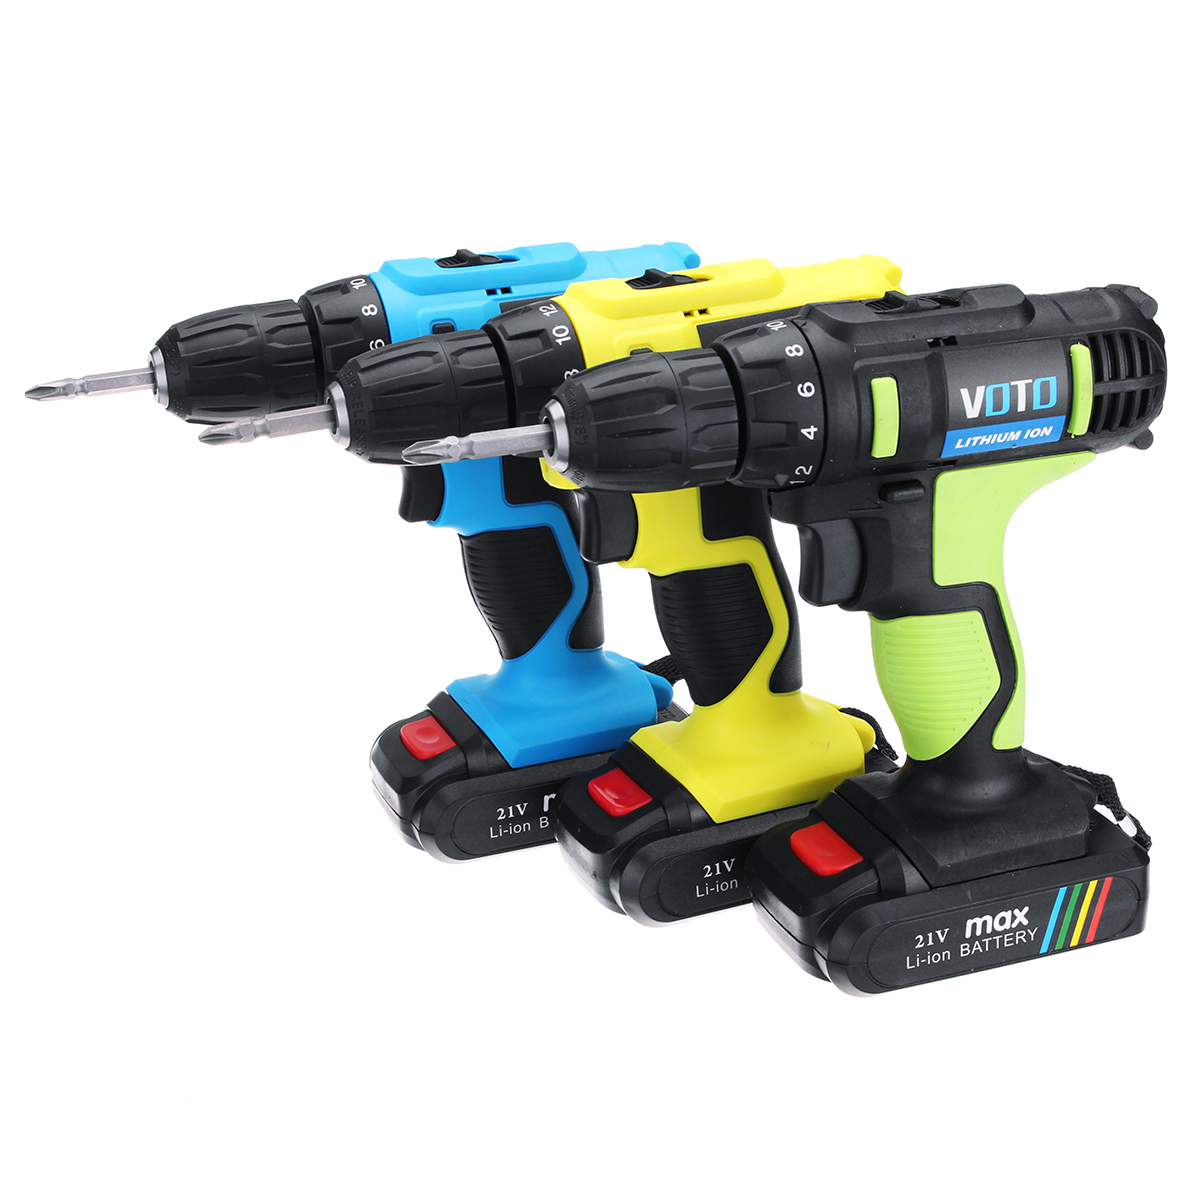 AC-110-220V-DC-21V-Lithium-Cordless-Rechargeable-Power-Drill-Electric-Screwdriver-Two-Speed-1305352-1